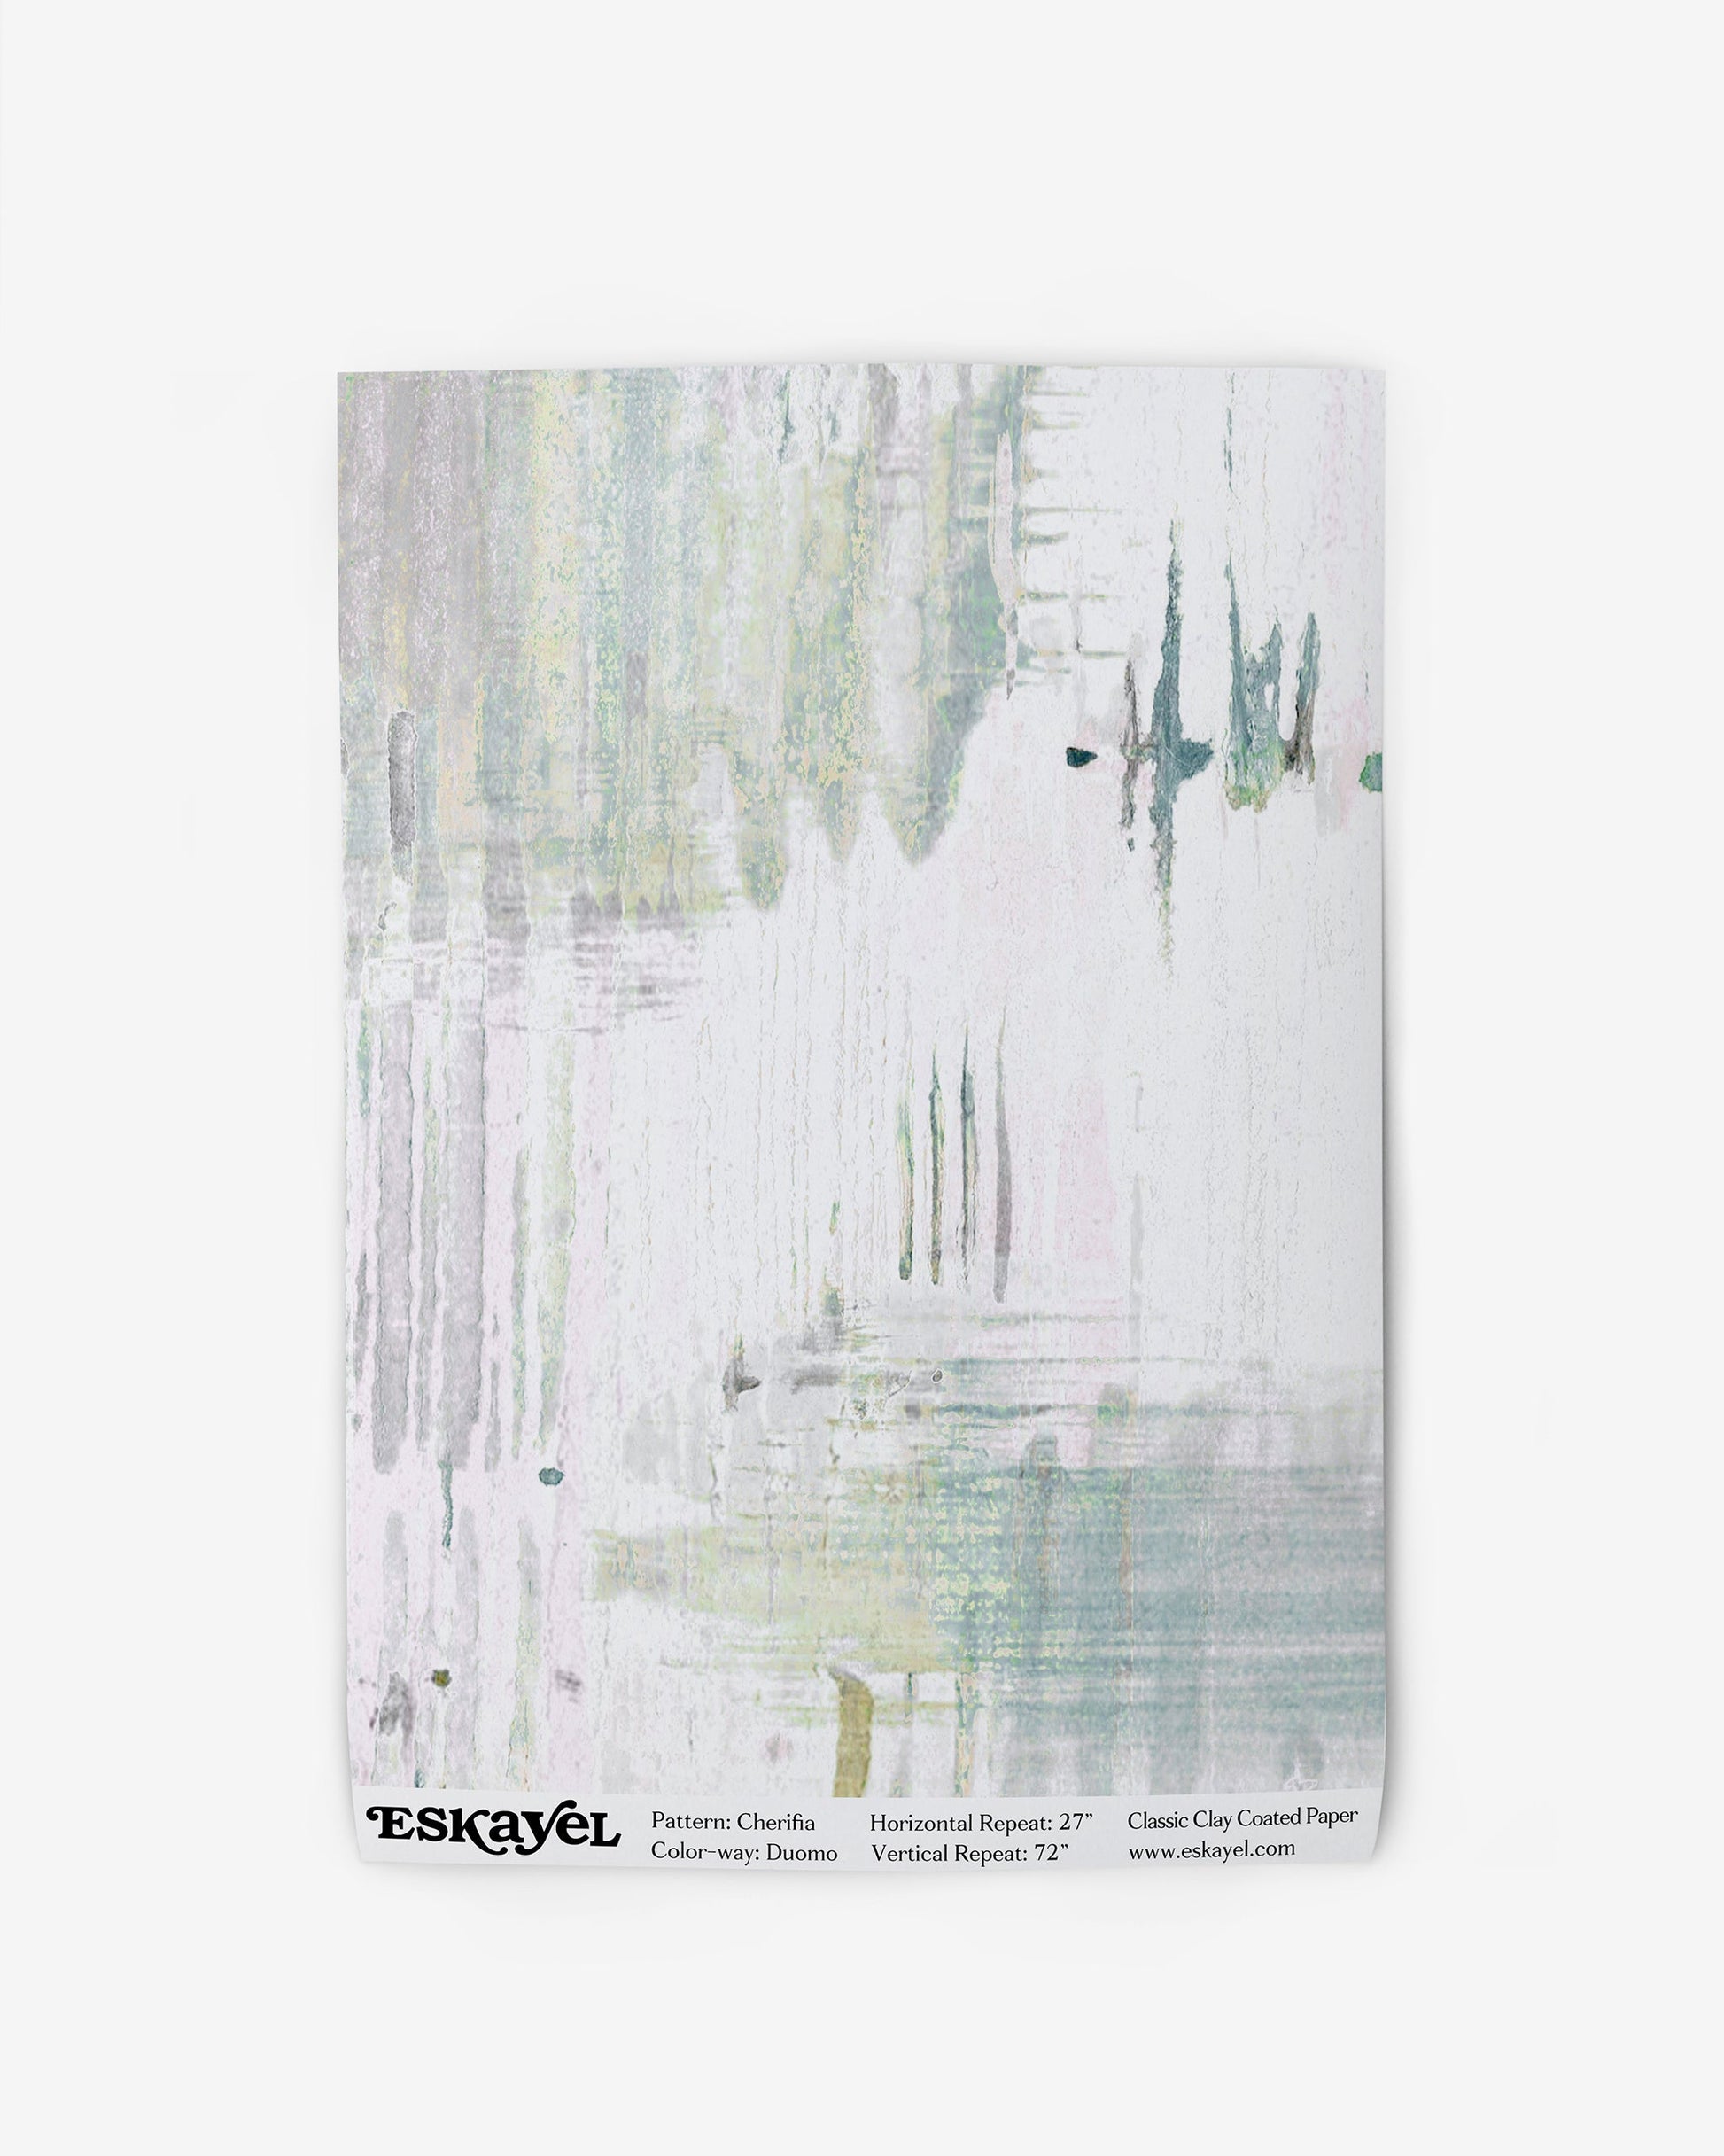 Cherifia Wallpaper Sample: An abstract painting on wallpaper